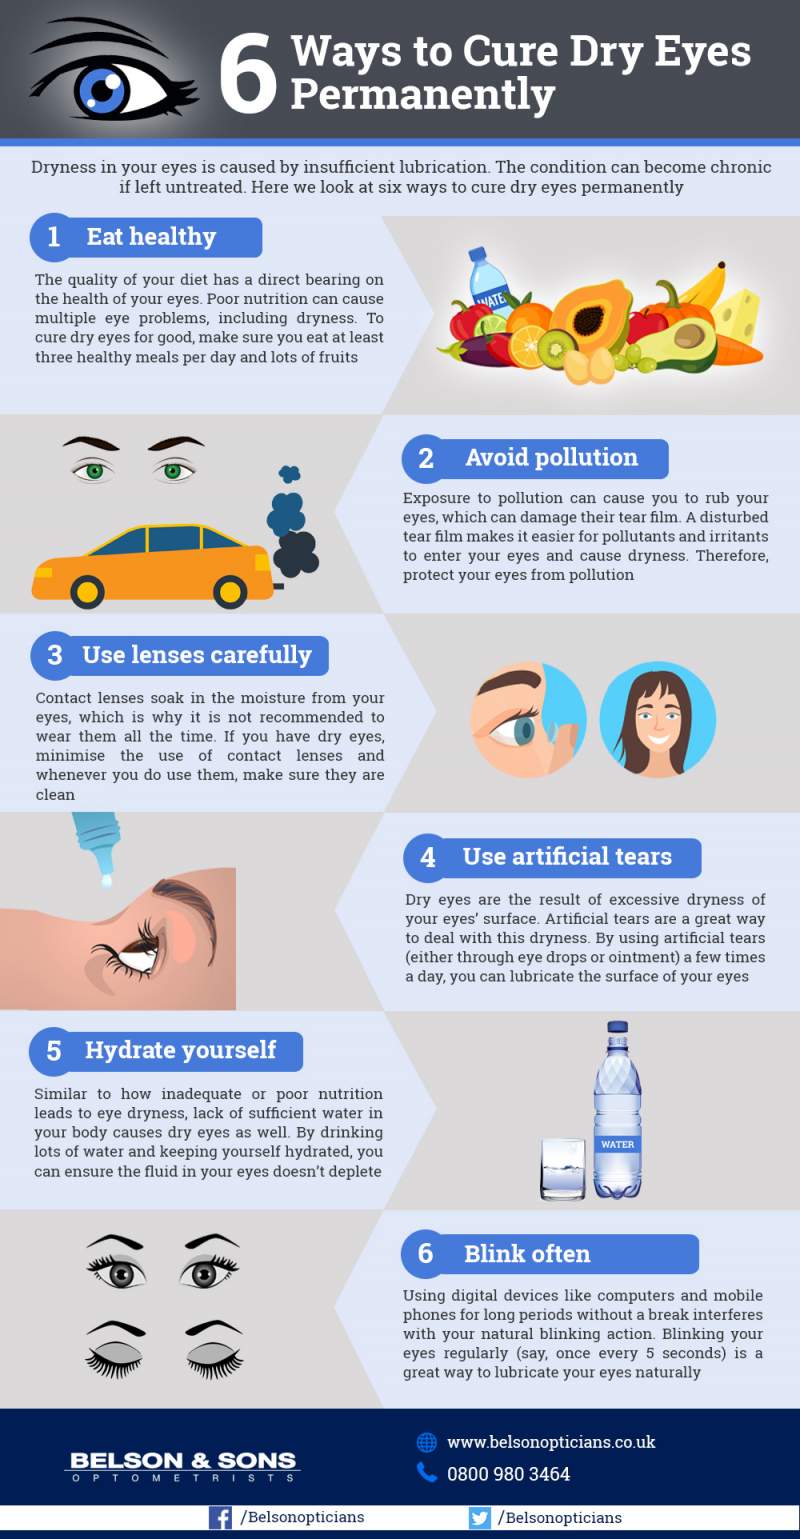 6 Ways to Cure Dry Eyes Permanently